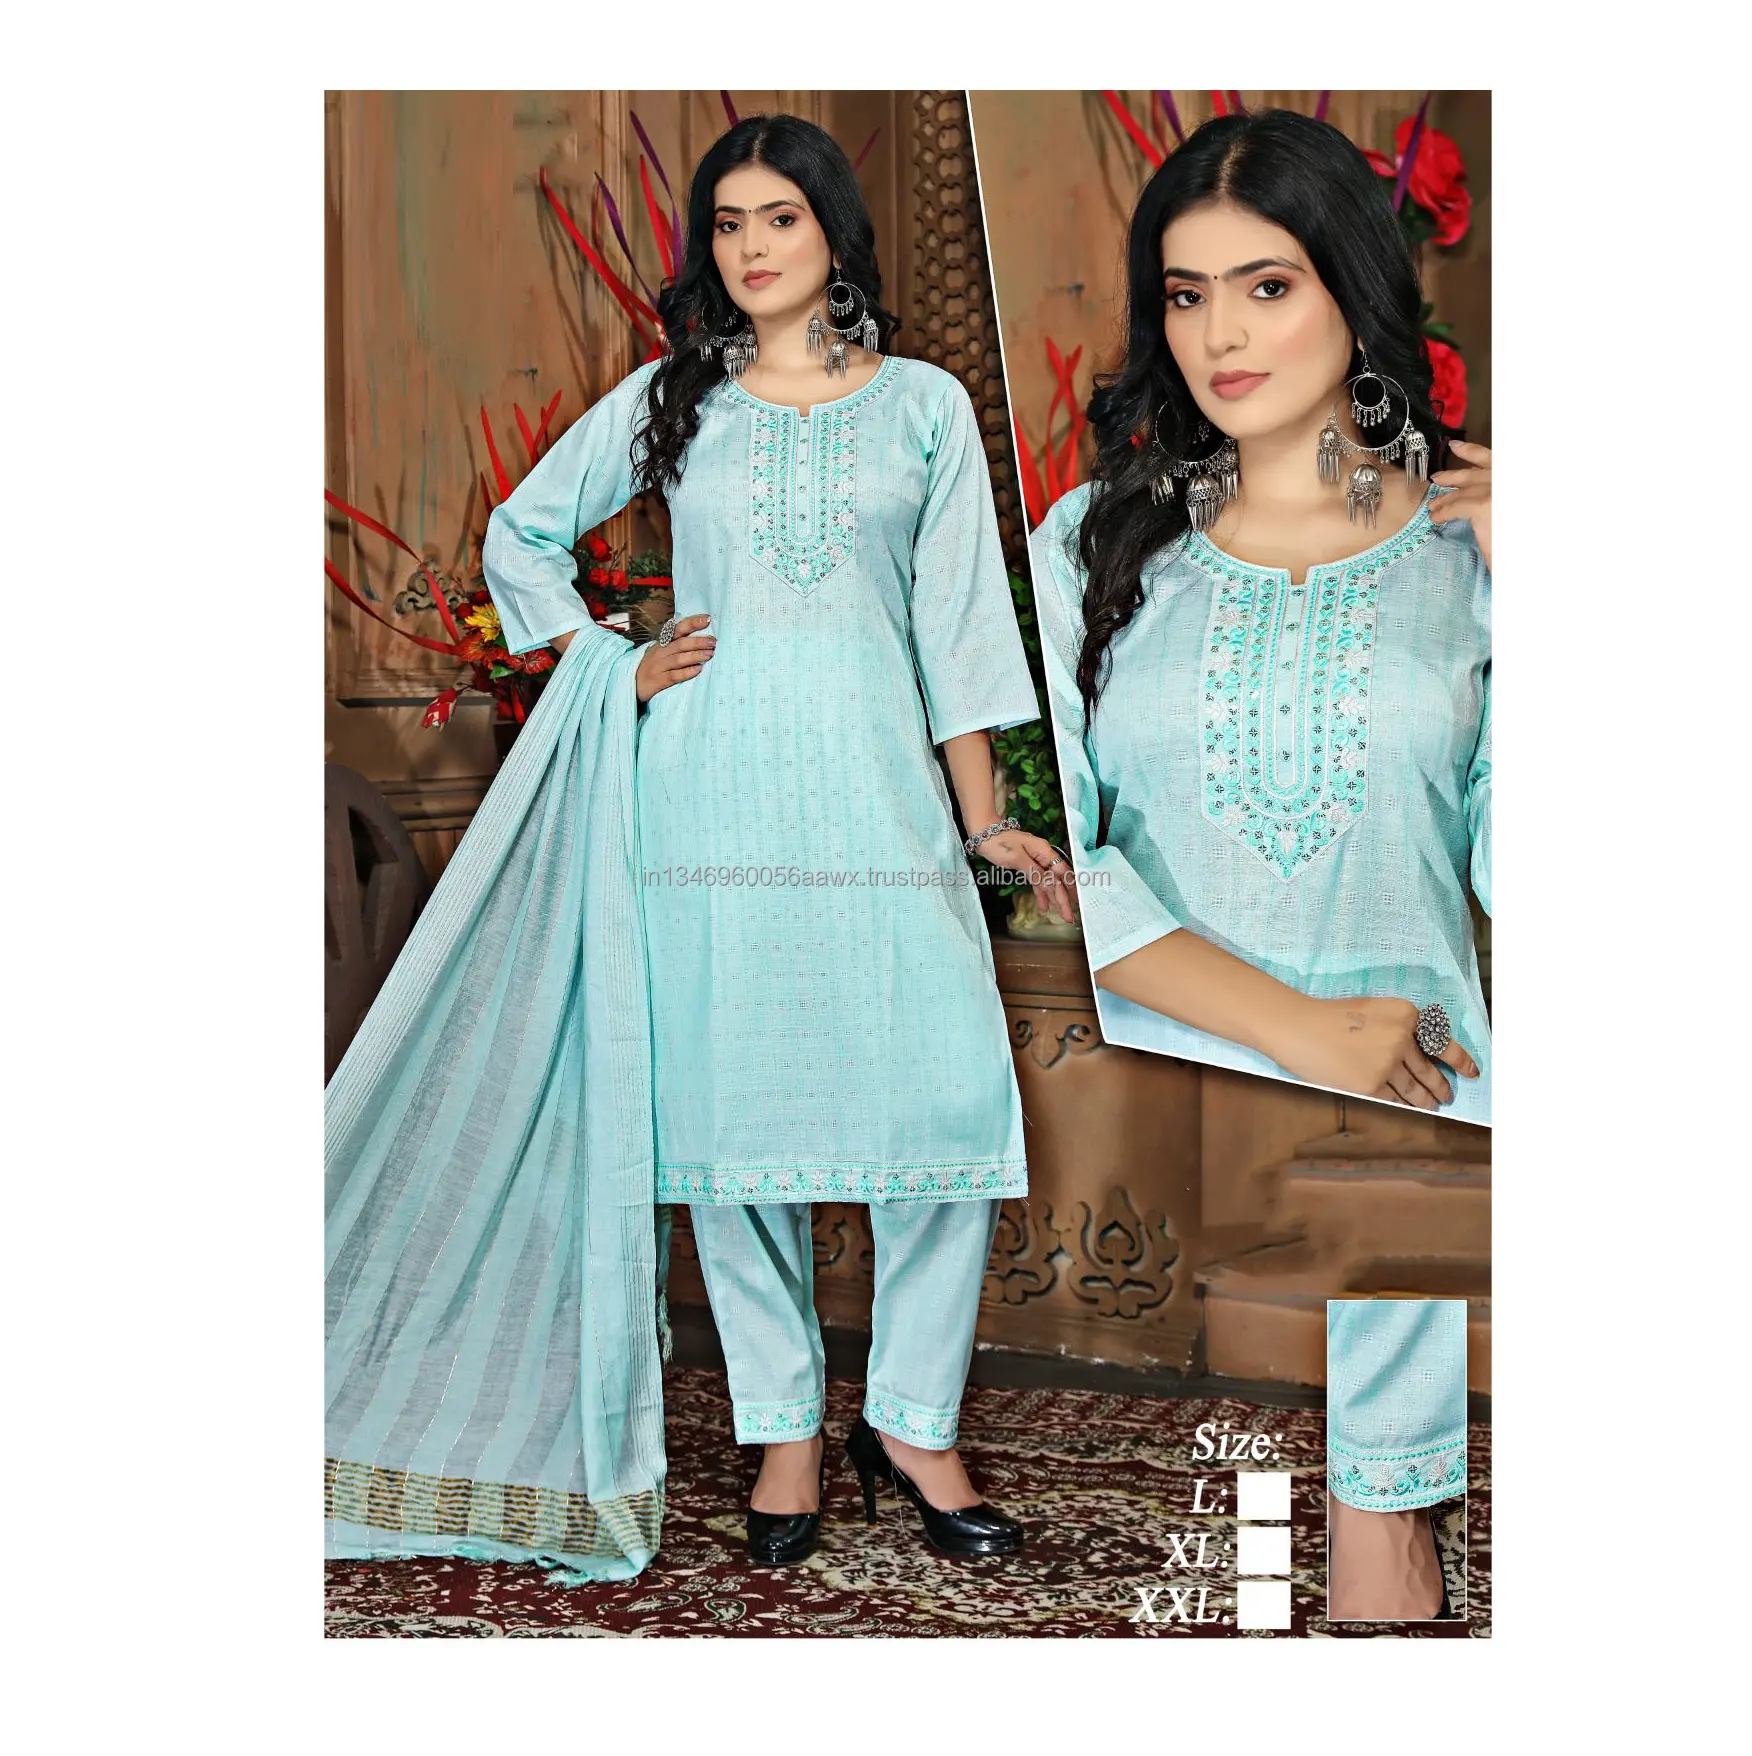 Top Quality Elegance in Sky Blue Rayon Kurti and Dress Collection for Wedding and Party Wear from India